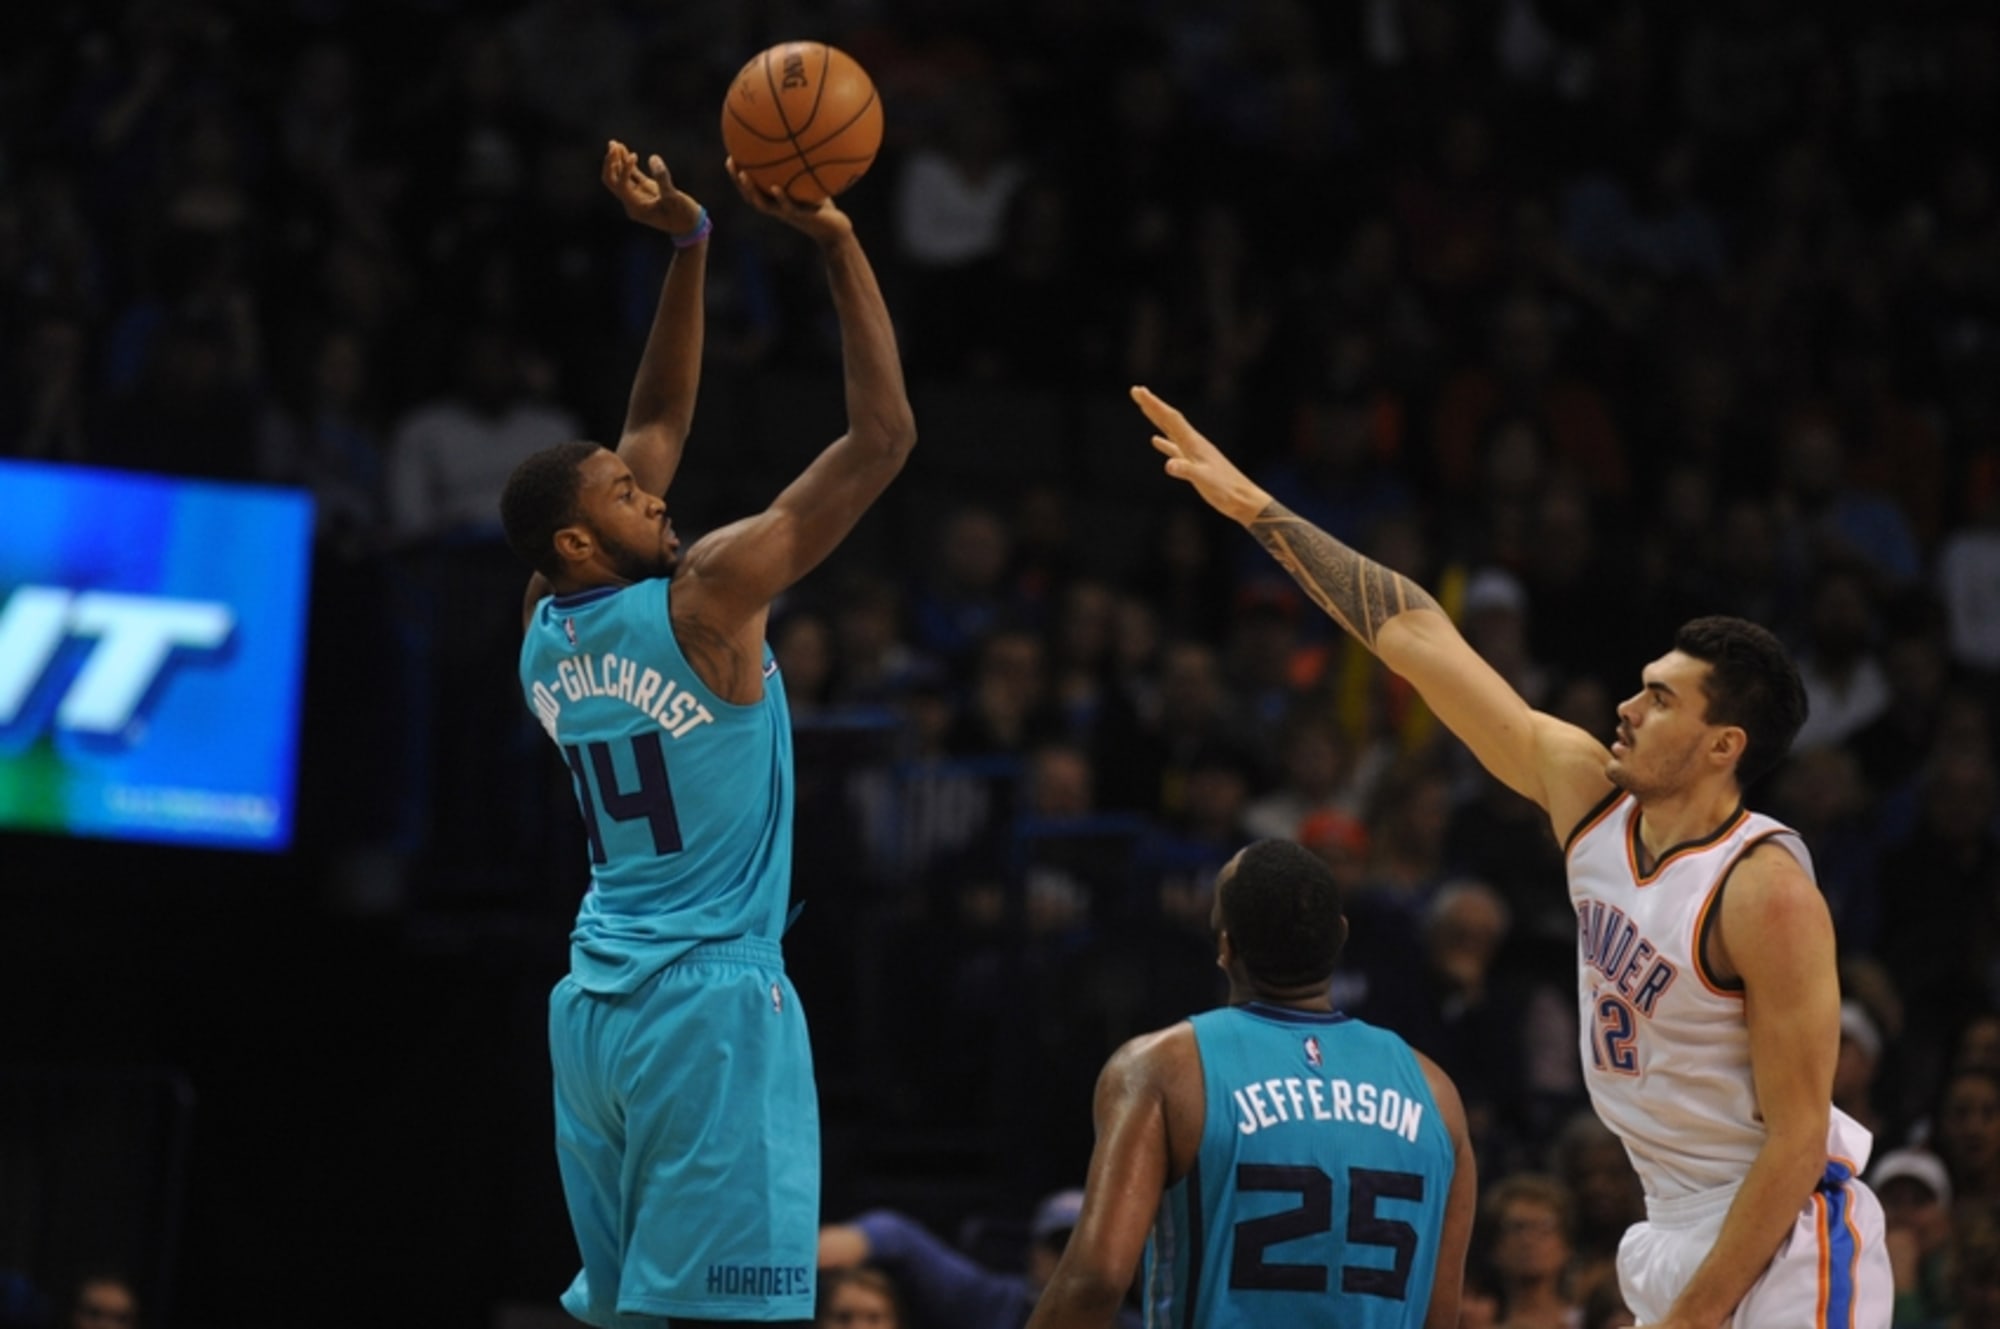 What to make of Michael Kidd-Gilchrist's first real minutes with